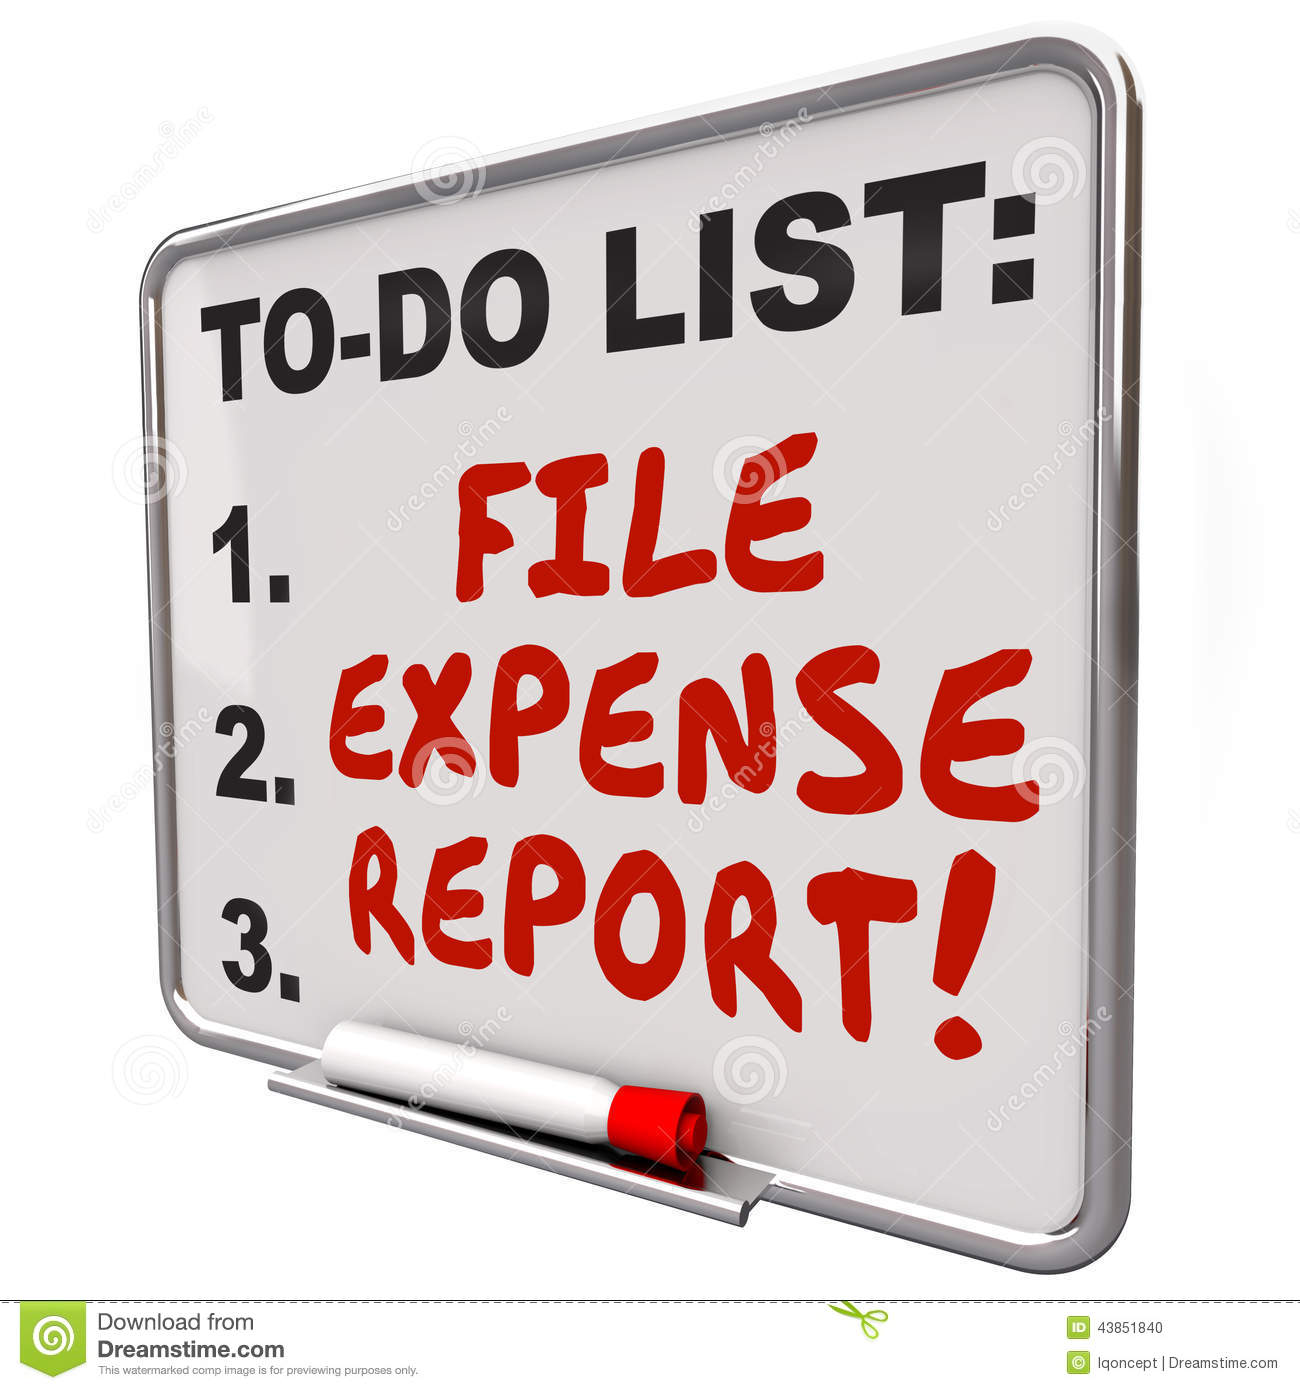 Expense report clipart.